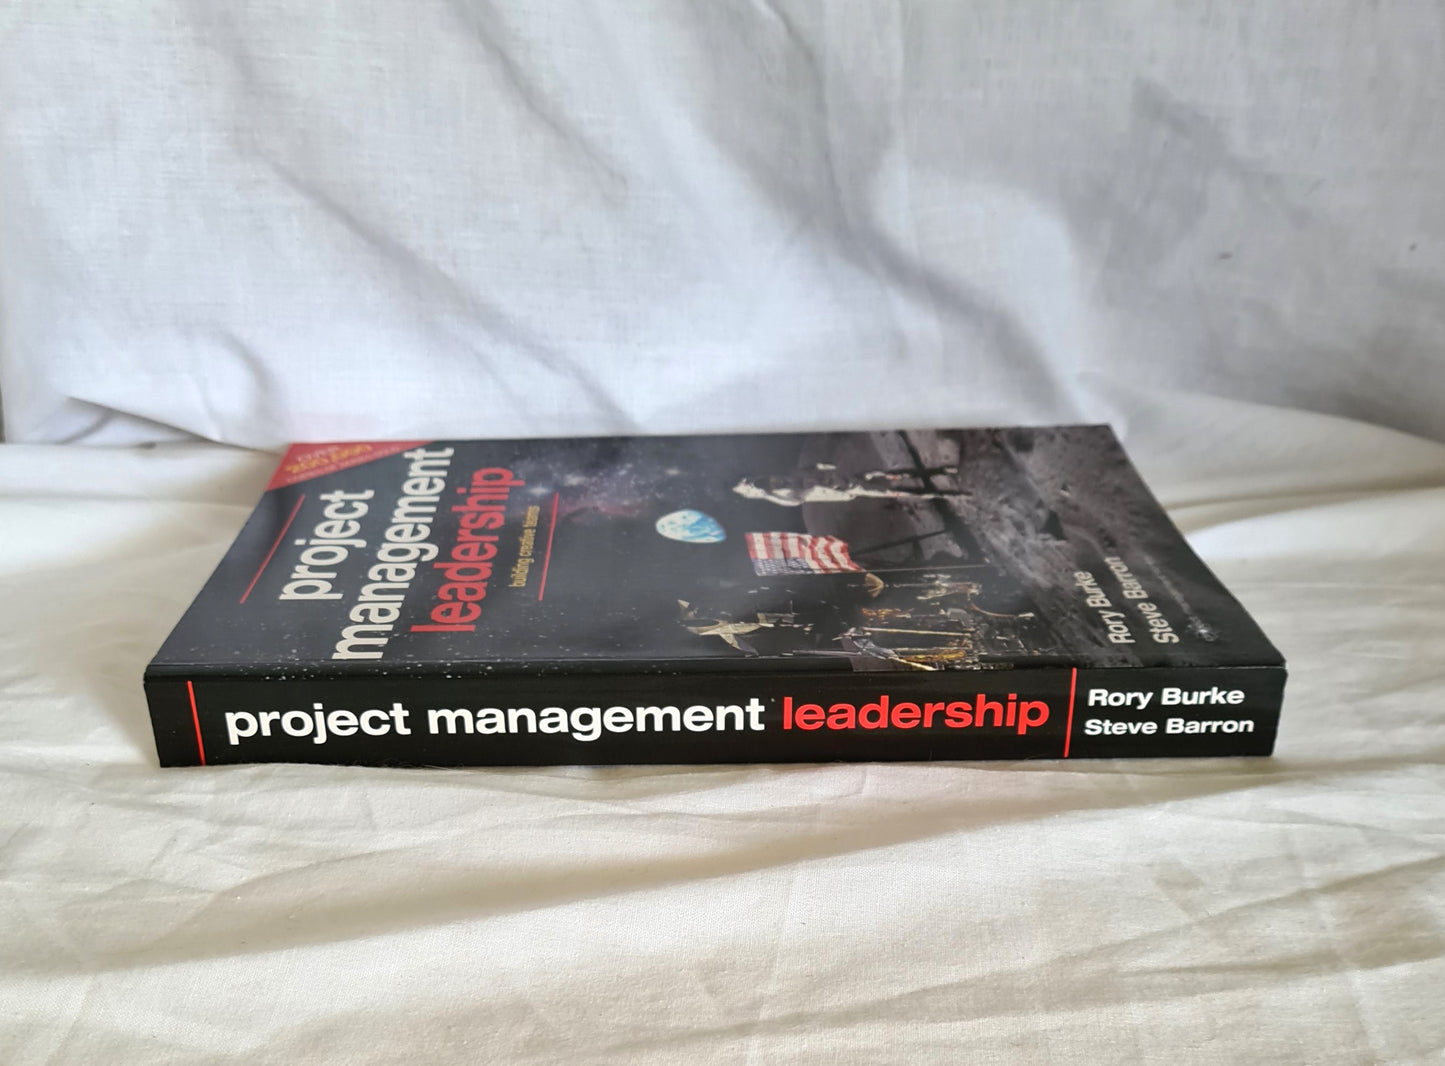 Project Management Leadership by Rory Burke and Steve Barron